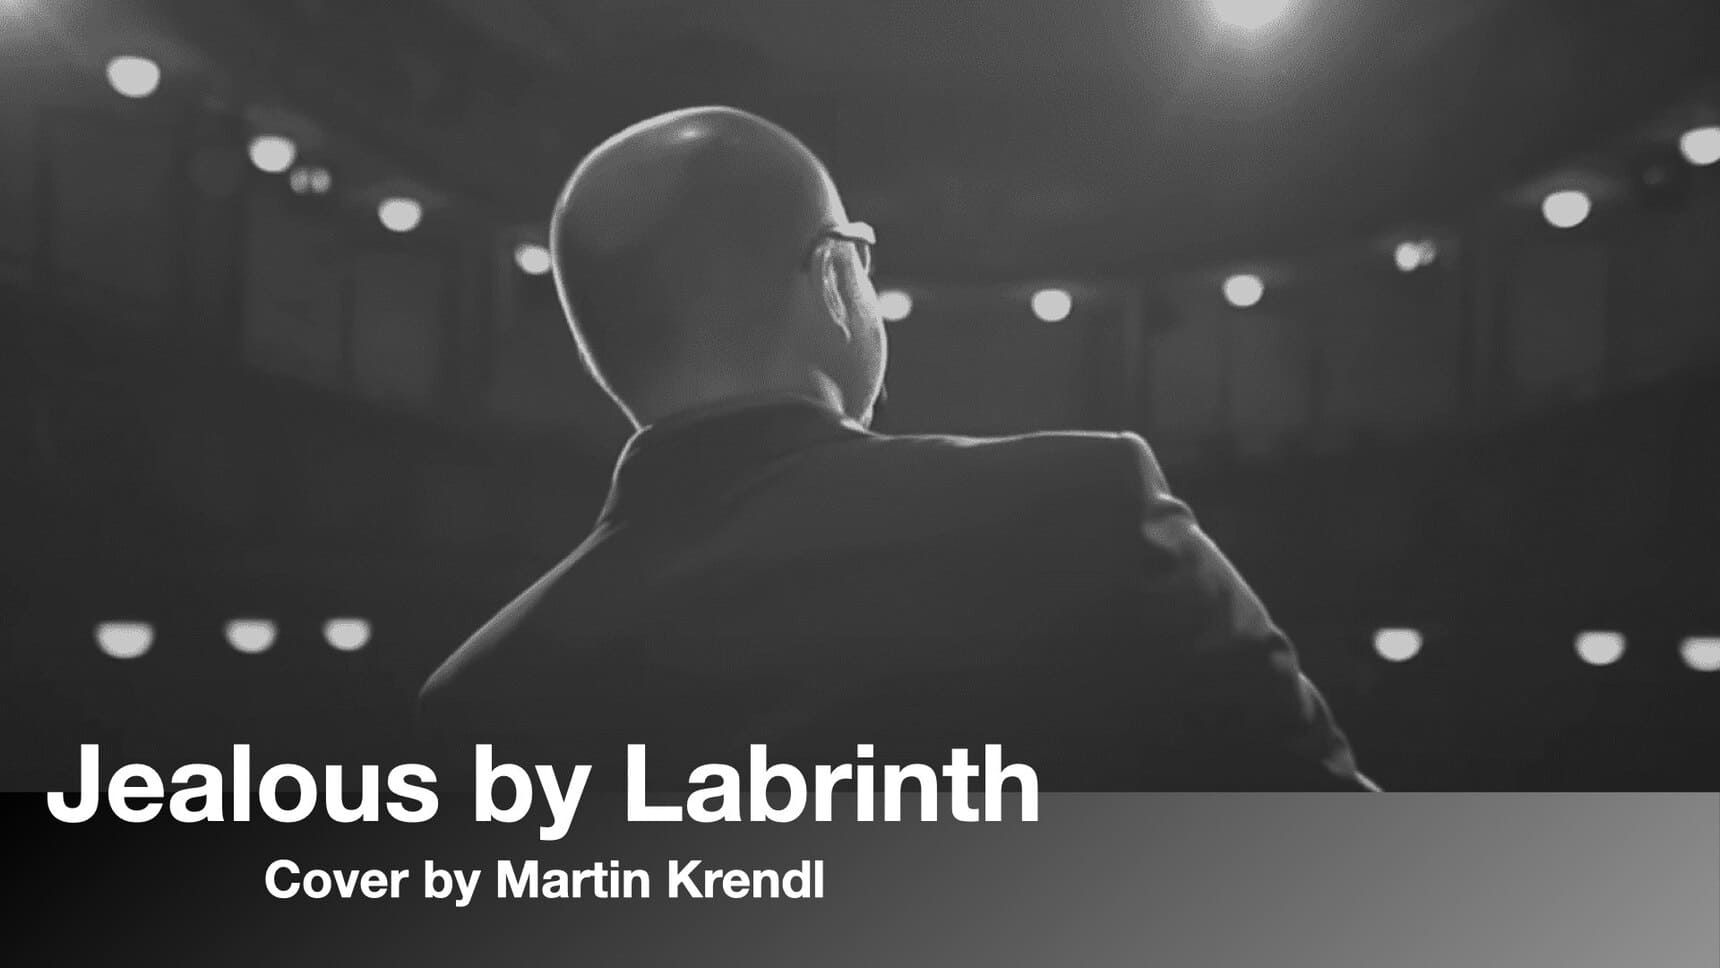 Jealous by Labrinth - Cover by Martin Krendl